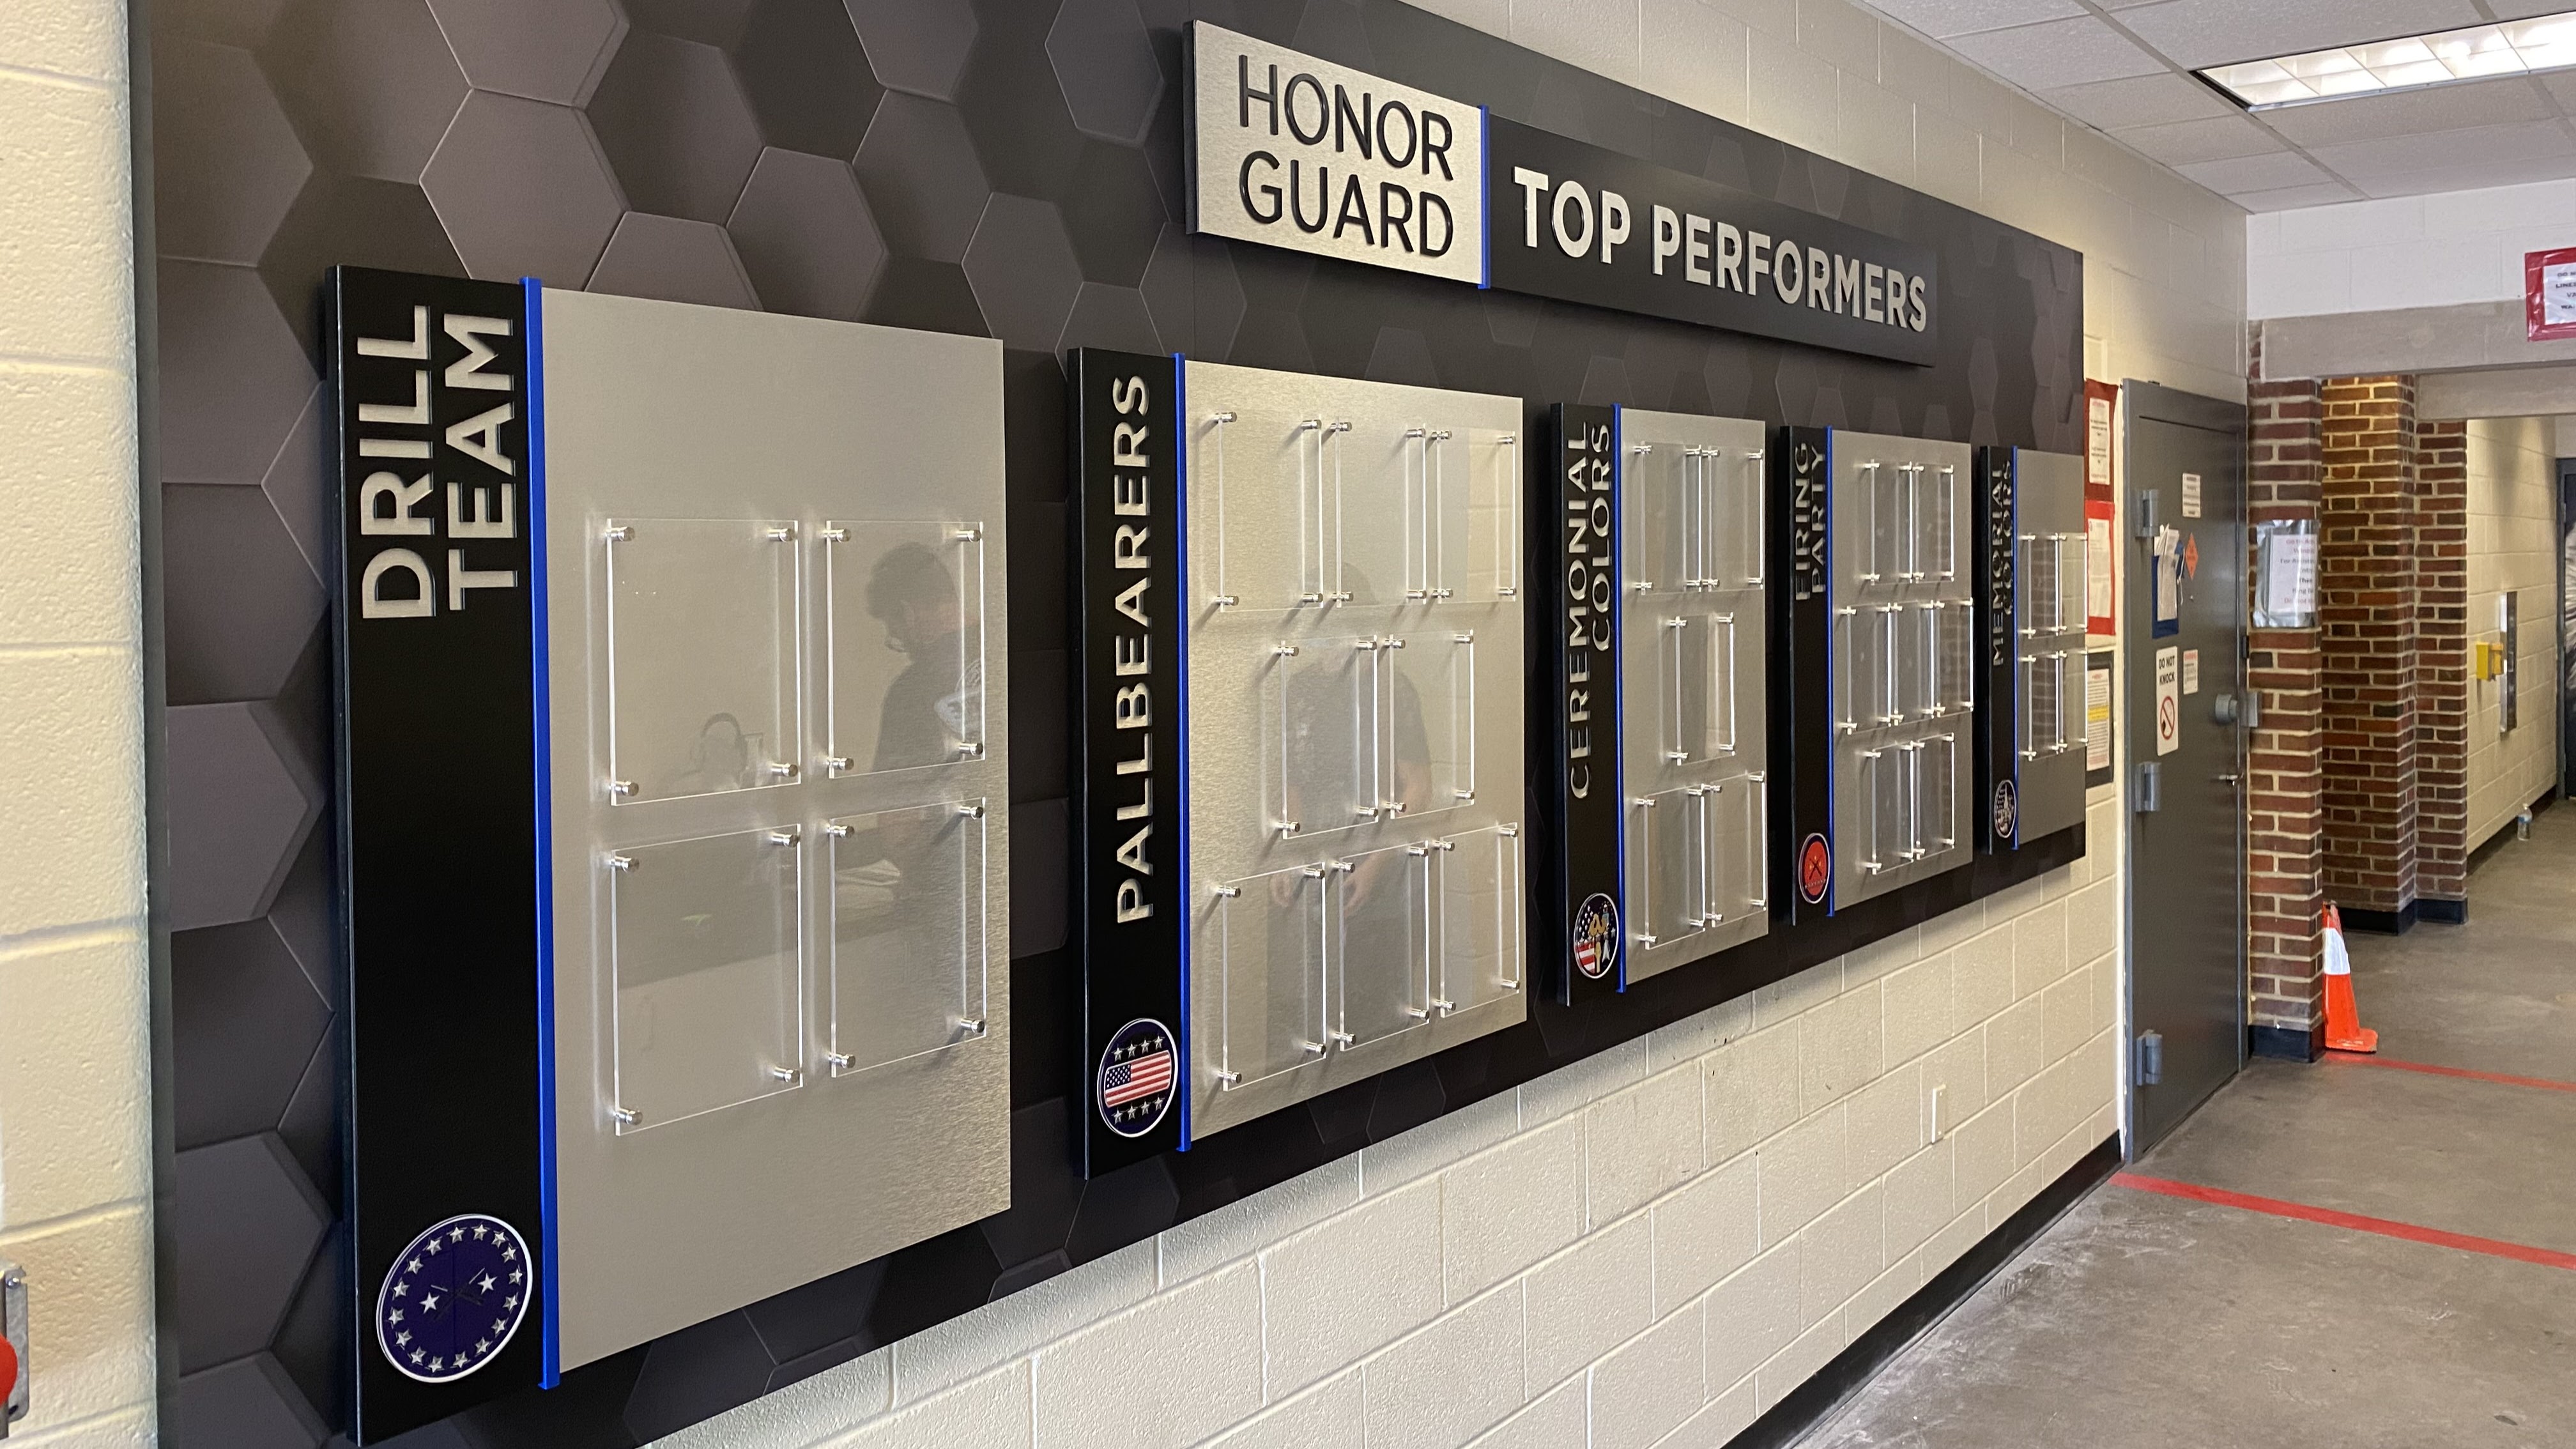 Top Performers recognition wall for Air Force base 